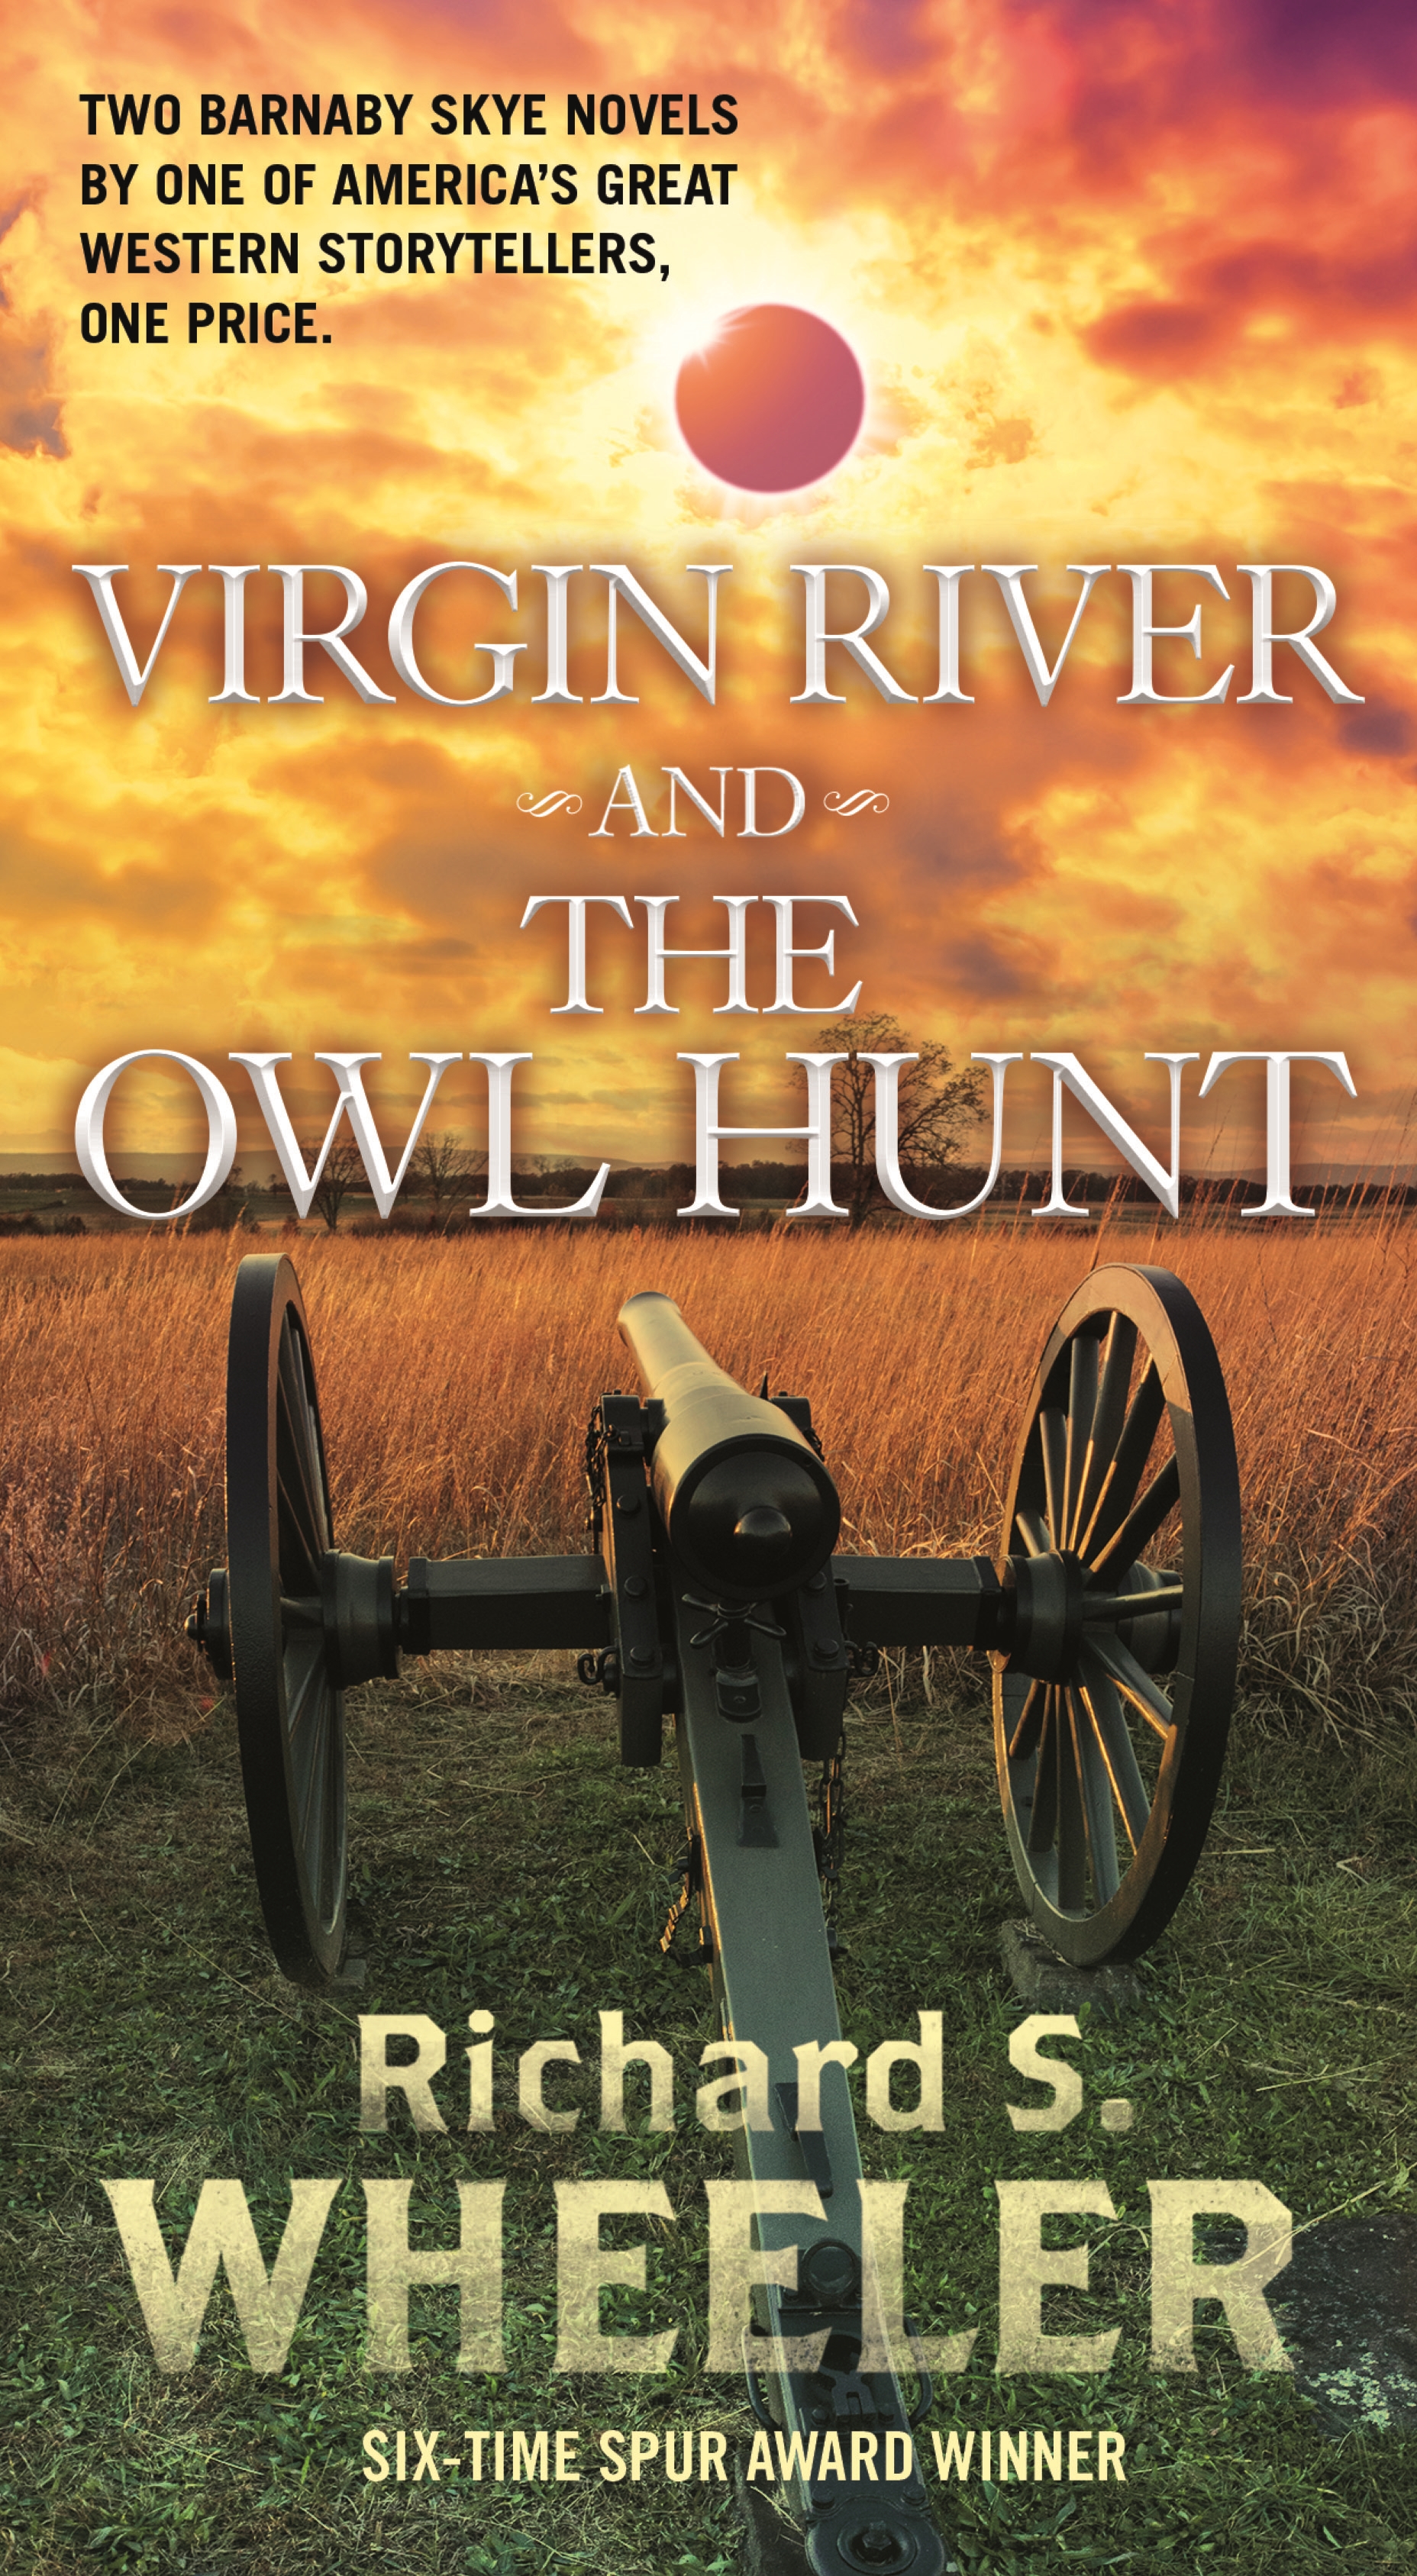 Virgin River and The Owl Hunt by Richard S. Wheeler